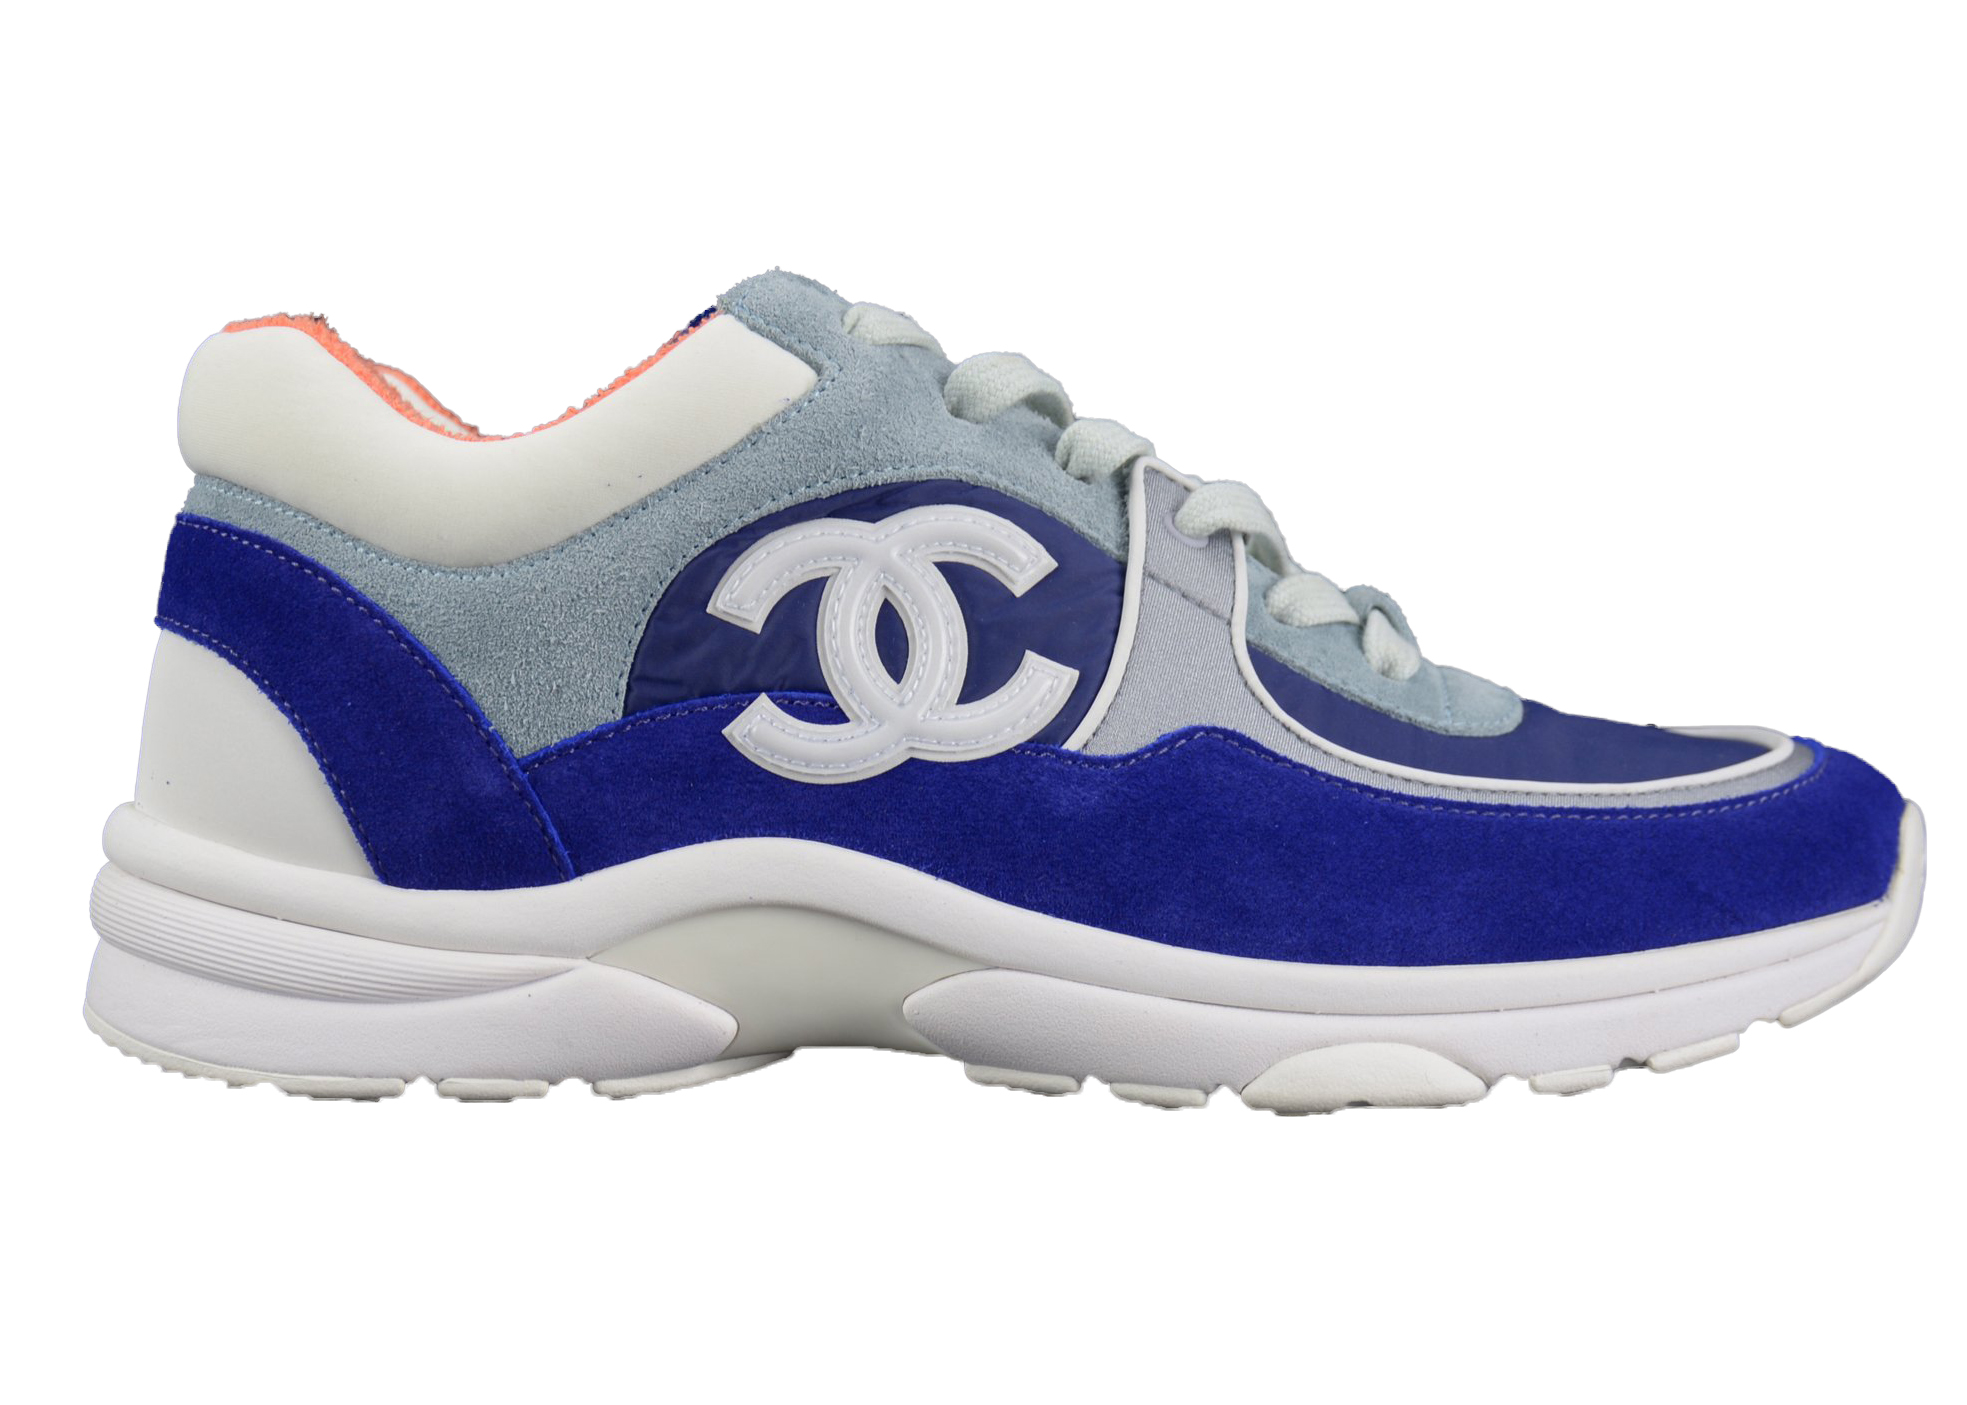 Chanel Interlocking CC Logo Velvet Sneakers  Sneakers Shoes  The RealReal